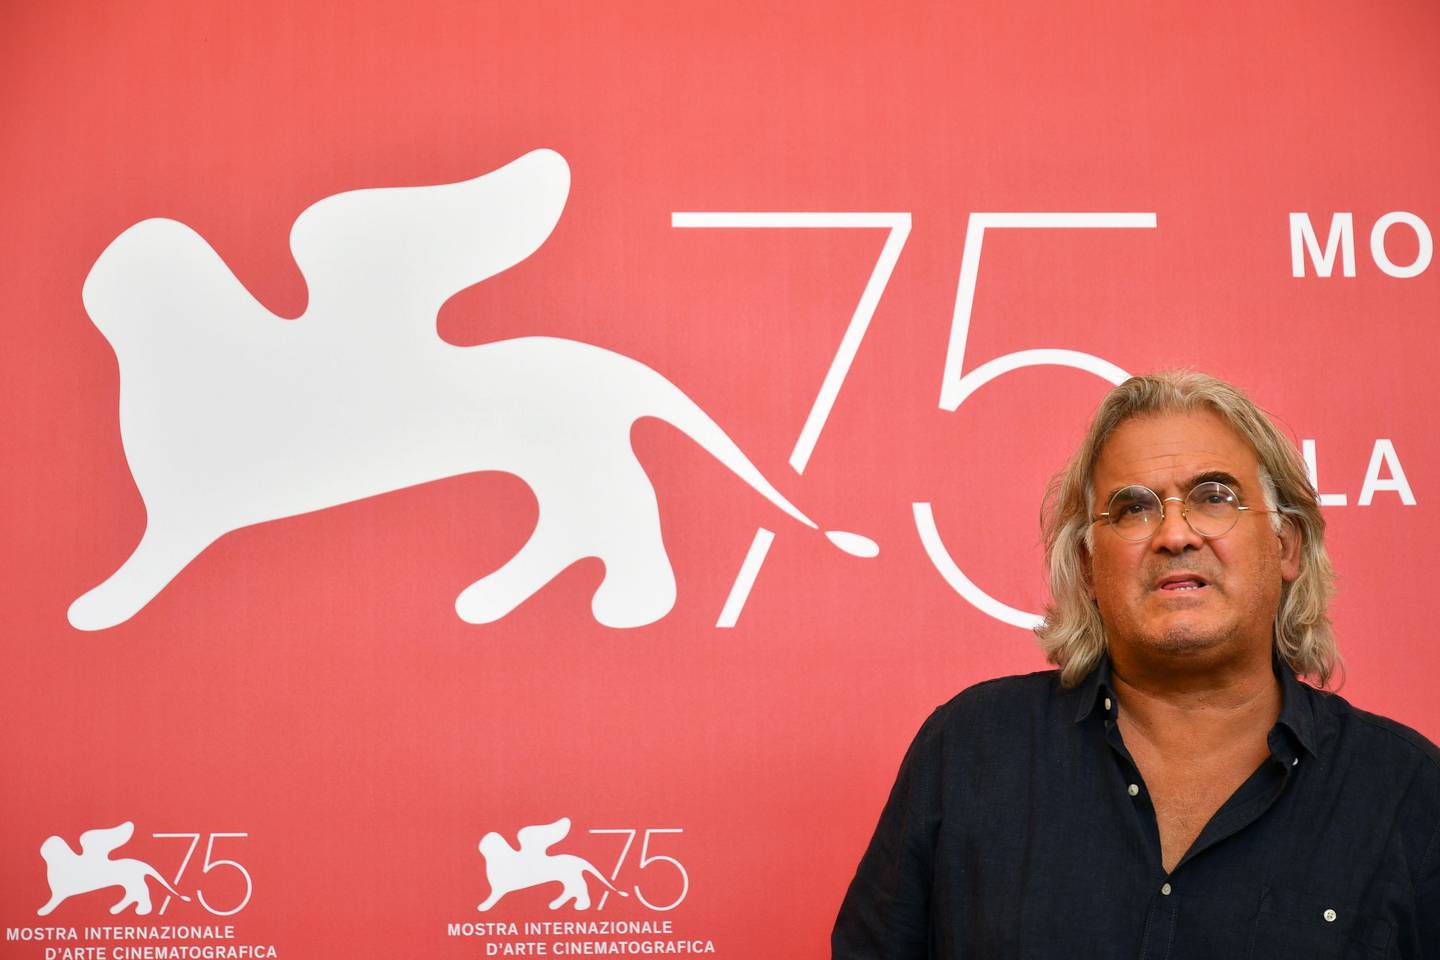 director Paul Greengrass attends a photocall for the film "22 July" presented in competition on September 5, 2018 during the 75th Venice Film Festival at Venice Lido. (Photo by Alberto PIZZOLI / AFP)